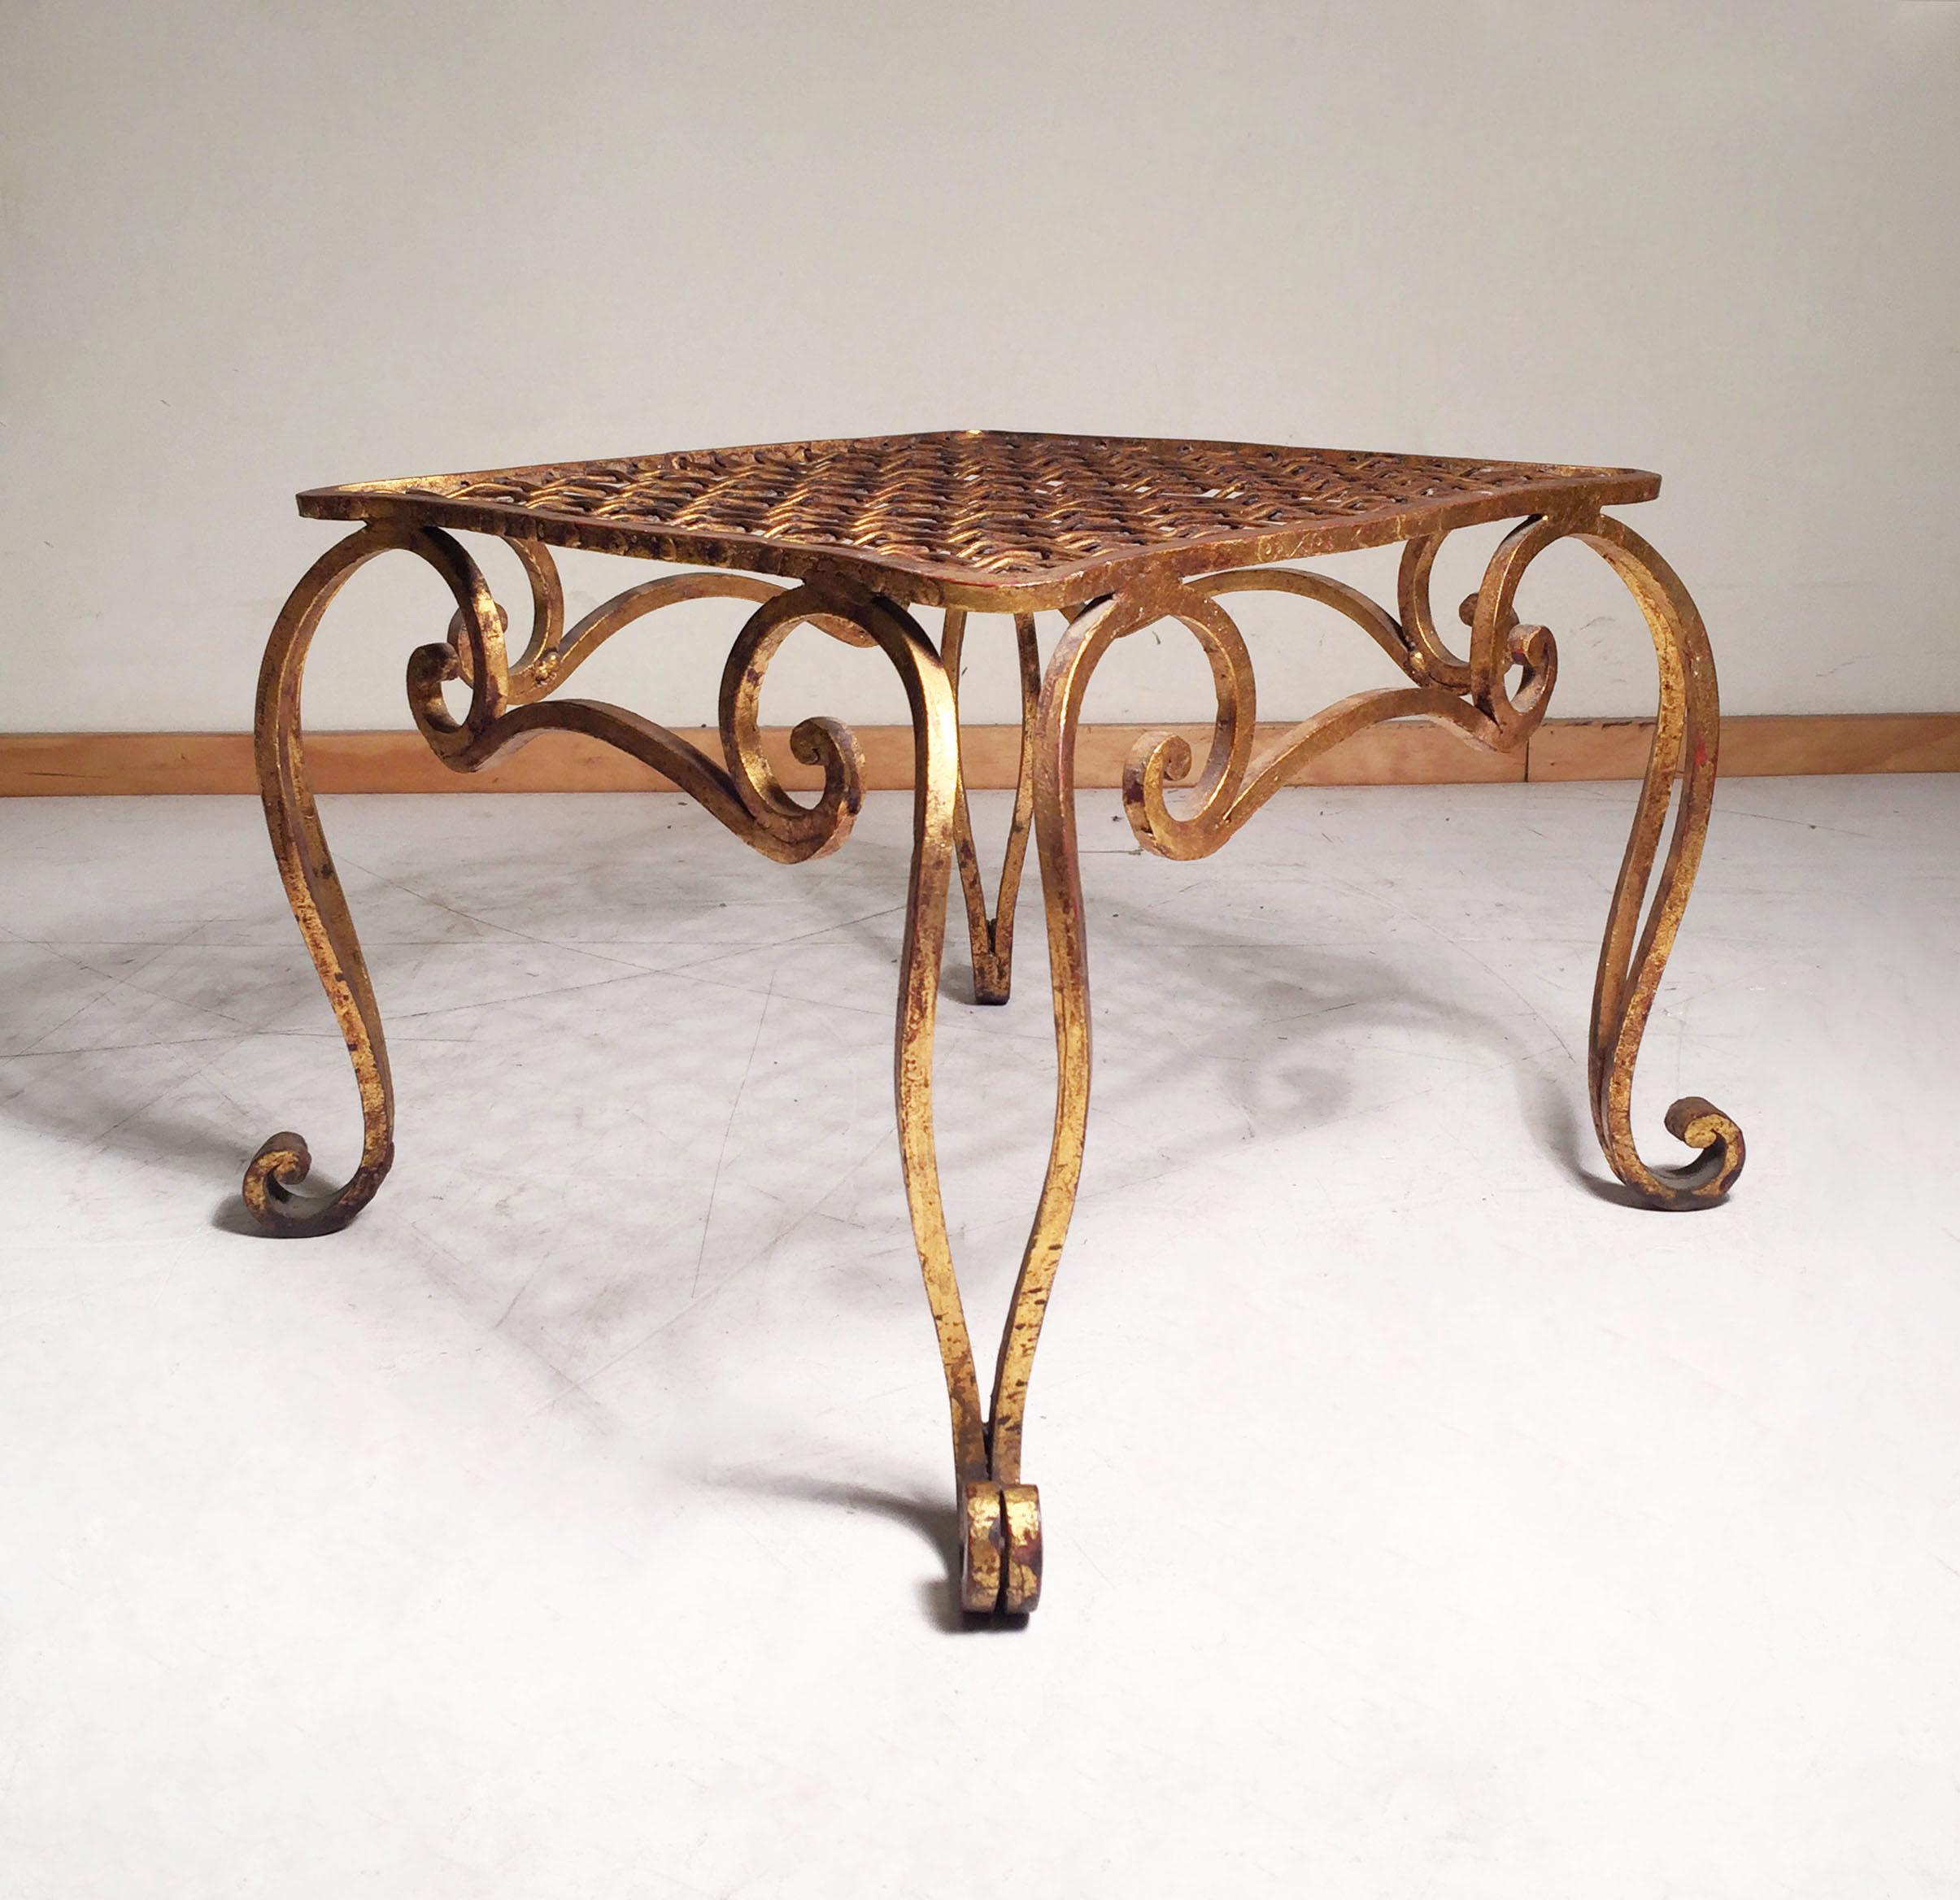 1940s French moderne gilt stool Bench Ottoman by Jean-Charles Moreux.

Height without cushion is 12.75. Cushion that comes with it is about 3.5